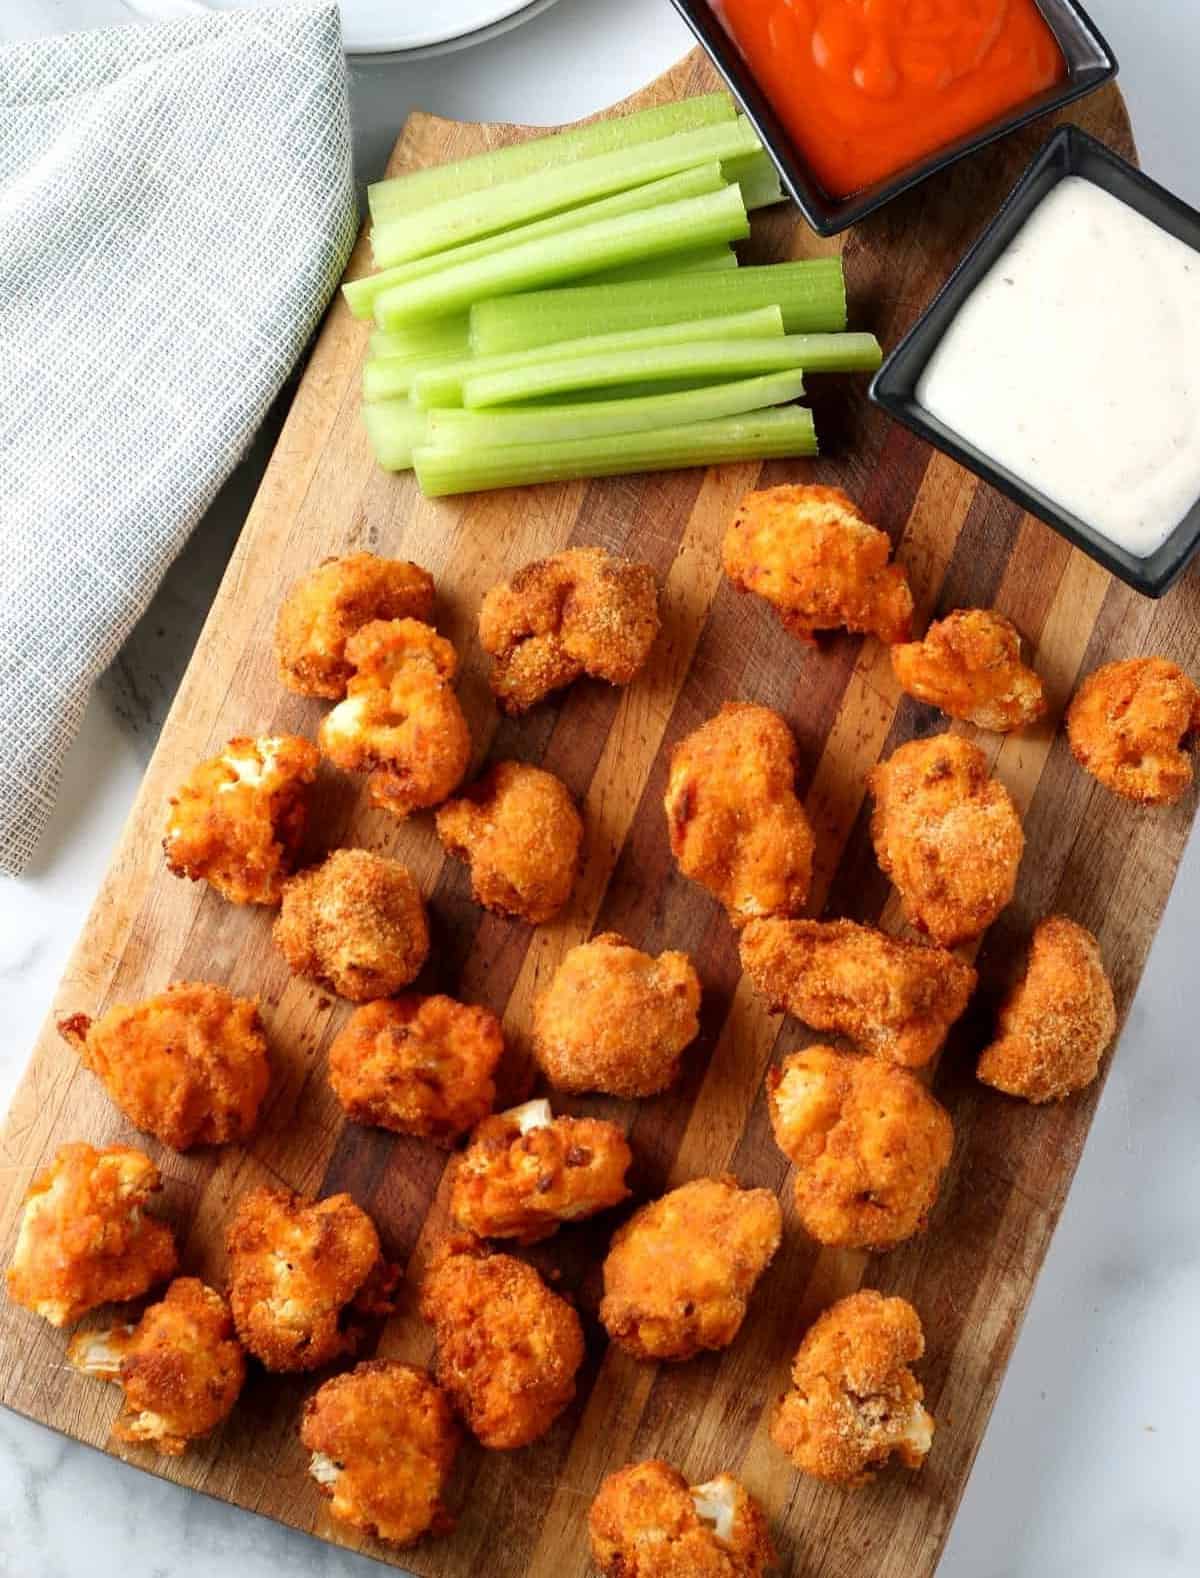 Perfect bite size air fryed cauliflower bites covered in a spicy mix. All are on a wooden cutting board.